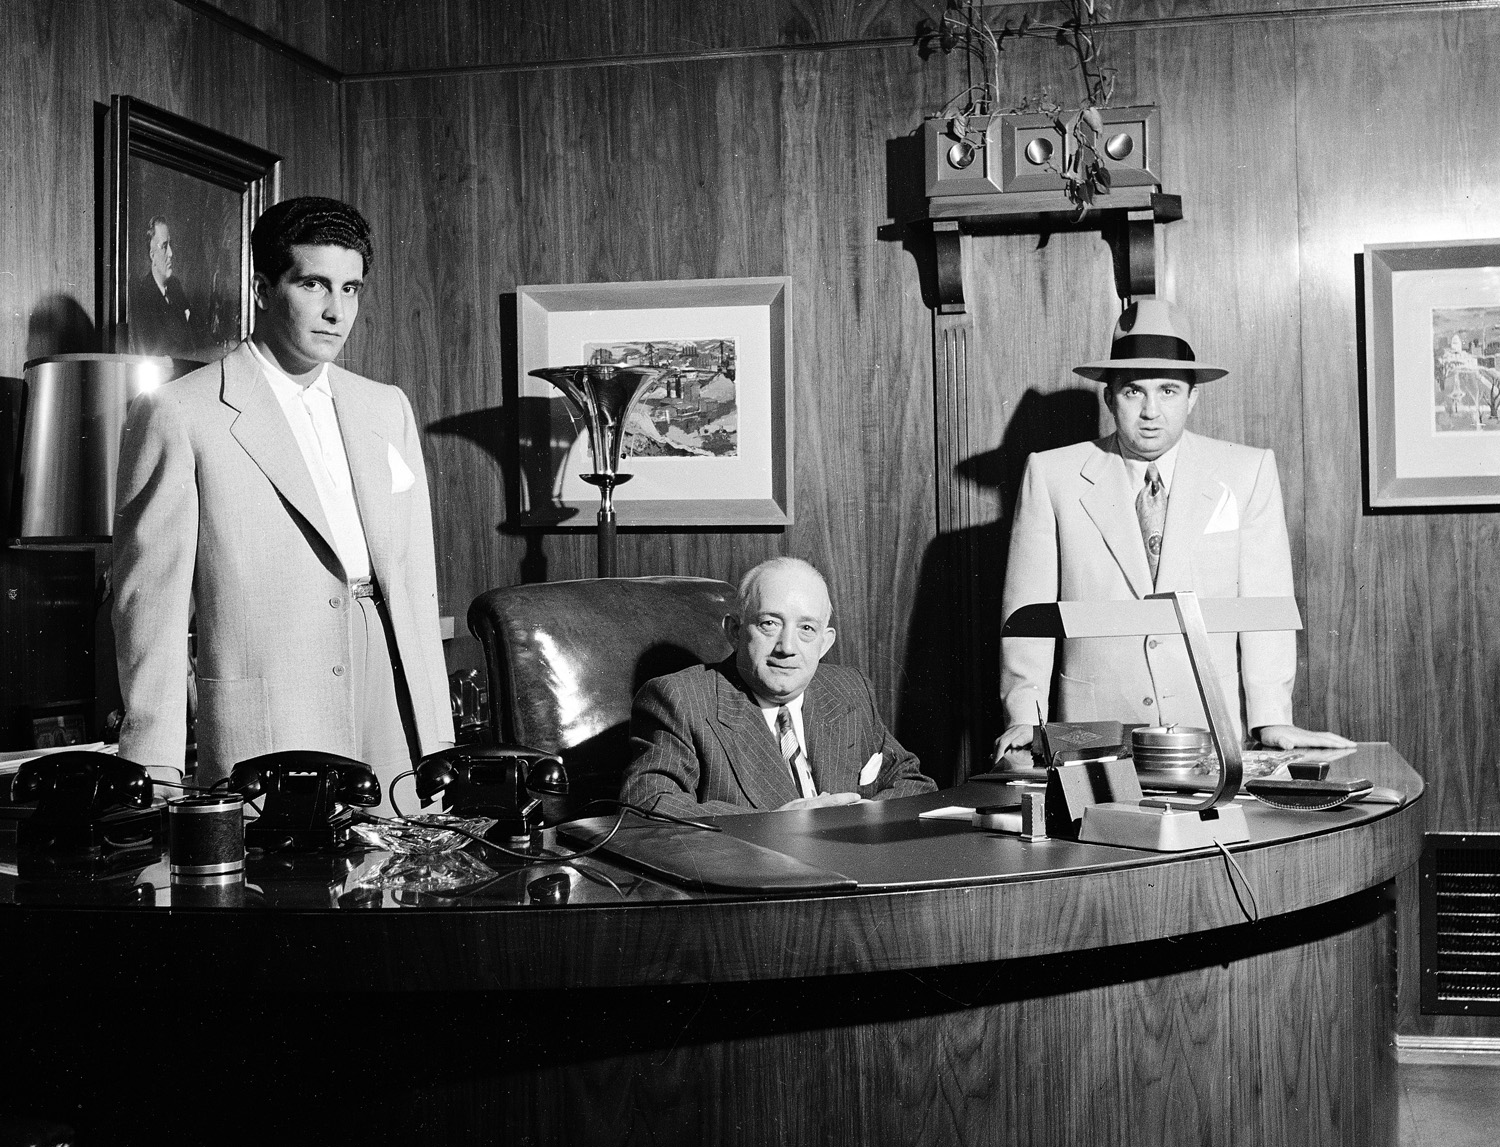 Mickey Cohen's enforcer, "Johnny Stomp" Stompanato (famously stabbed and killed by Lana Turner's 14-year-old daughter, Cheryl Crane, in 1958), business manager Mike Howard and Cohen pose in Cohen's office in Los Angeles, 1949.